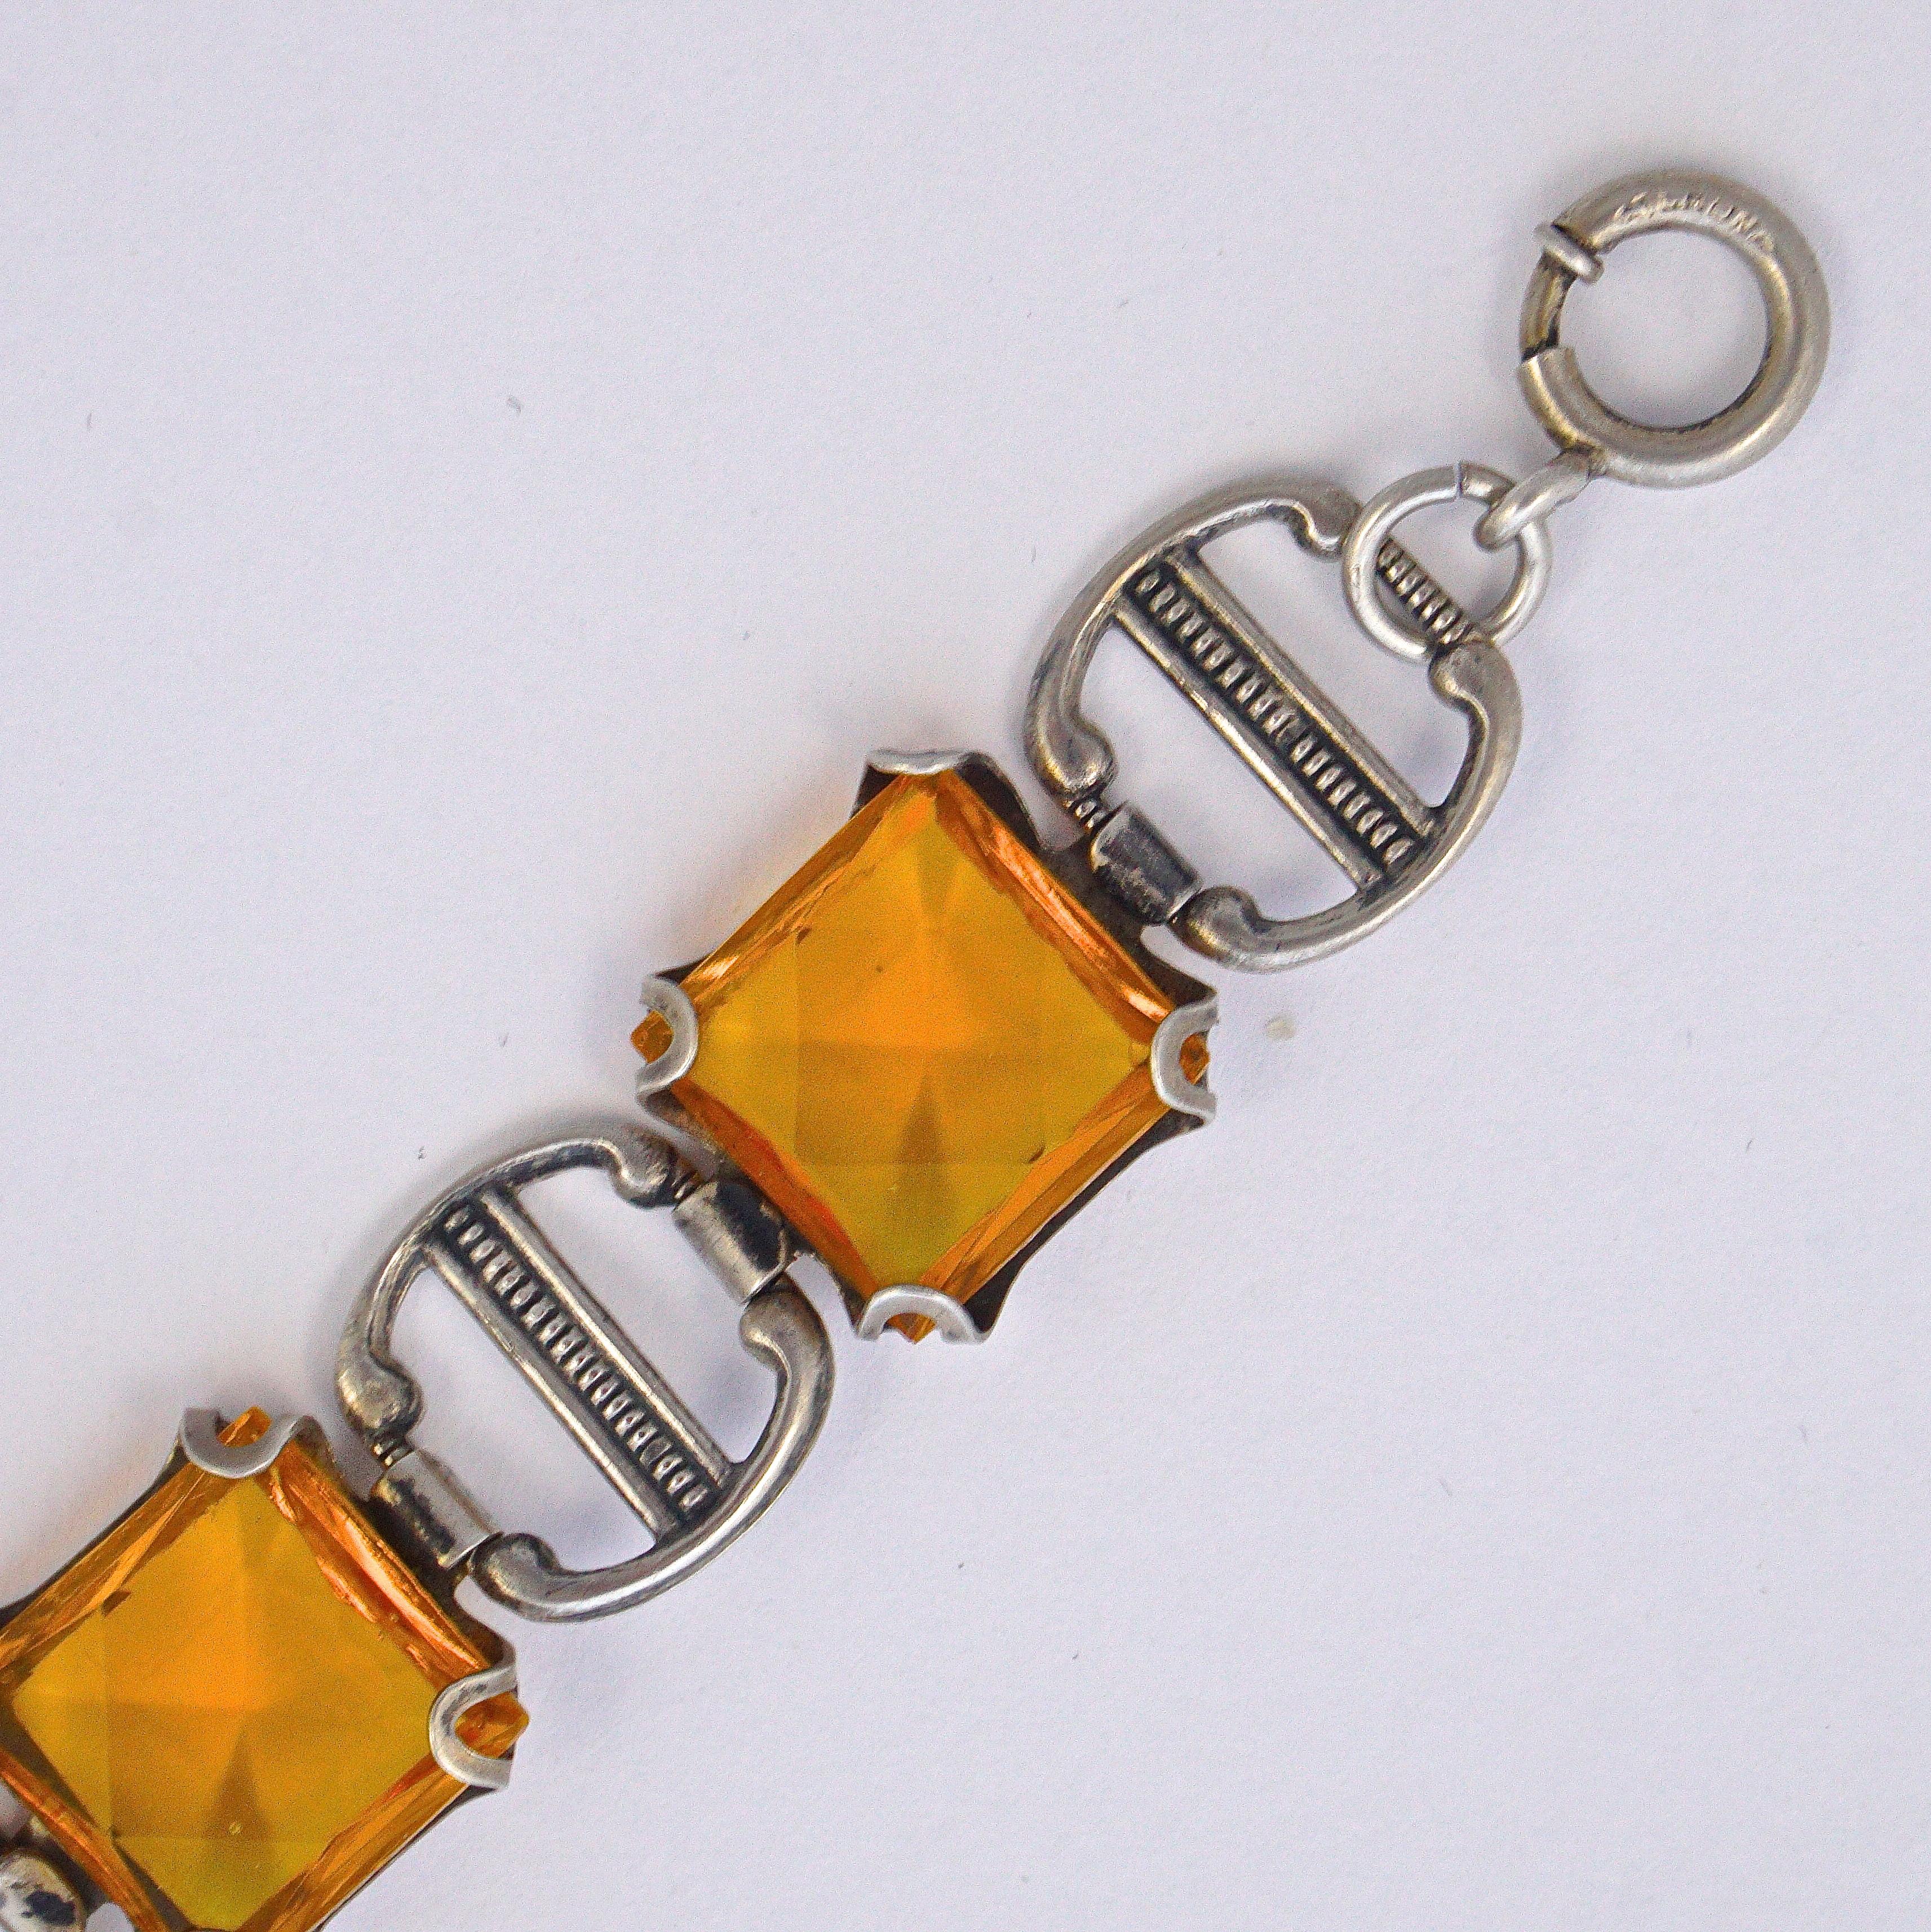 Stylish Art Deco sterling silver link bracelet, featuring lovely amber glass stones in open back settings. There is a spring bolt clasp which is marked Sterling, and the bracelet tests for silver. The faceted glass stones are raised at the front and